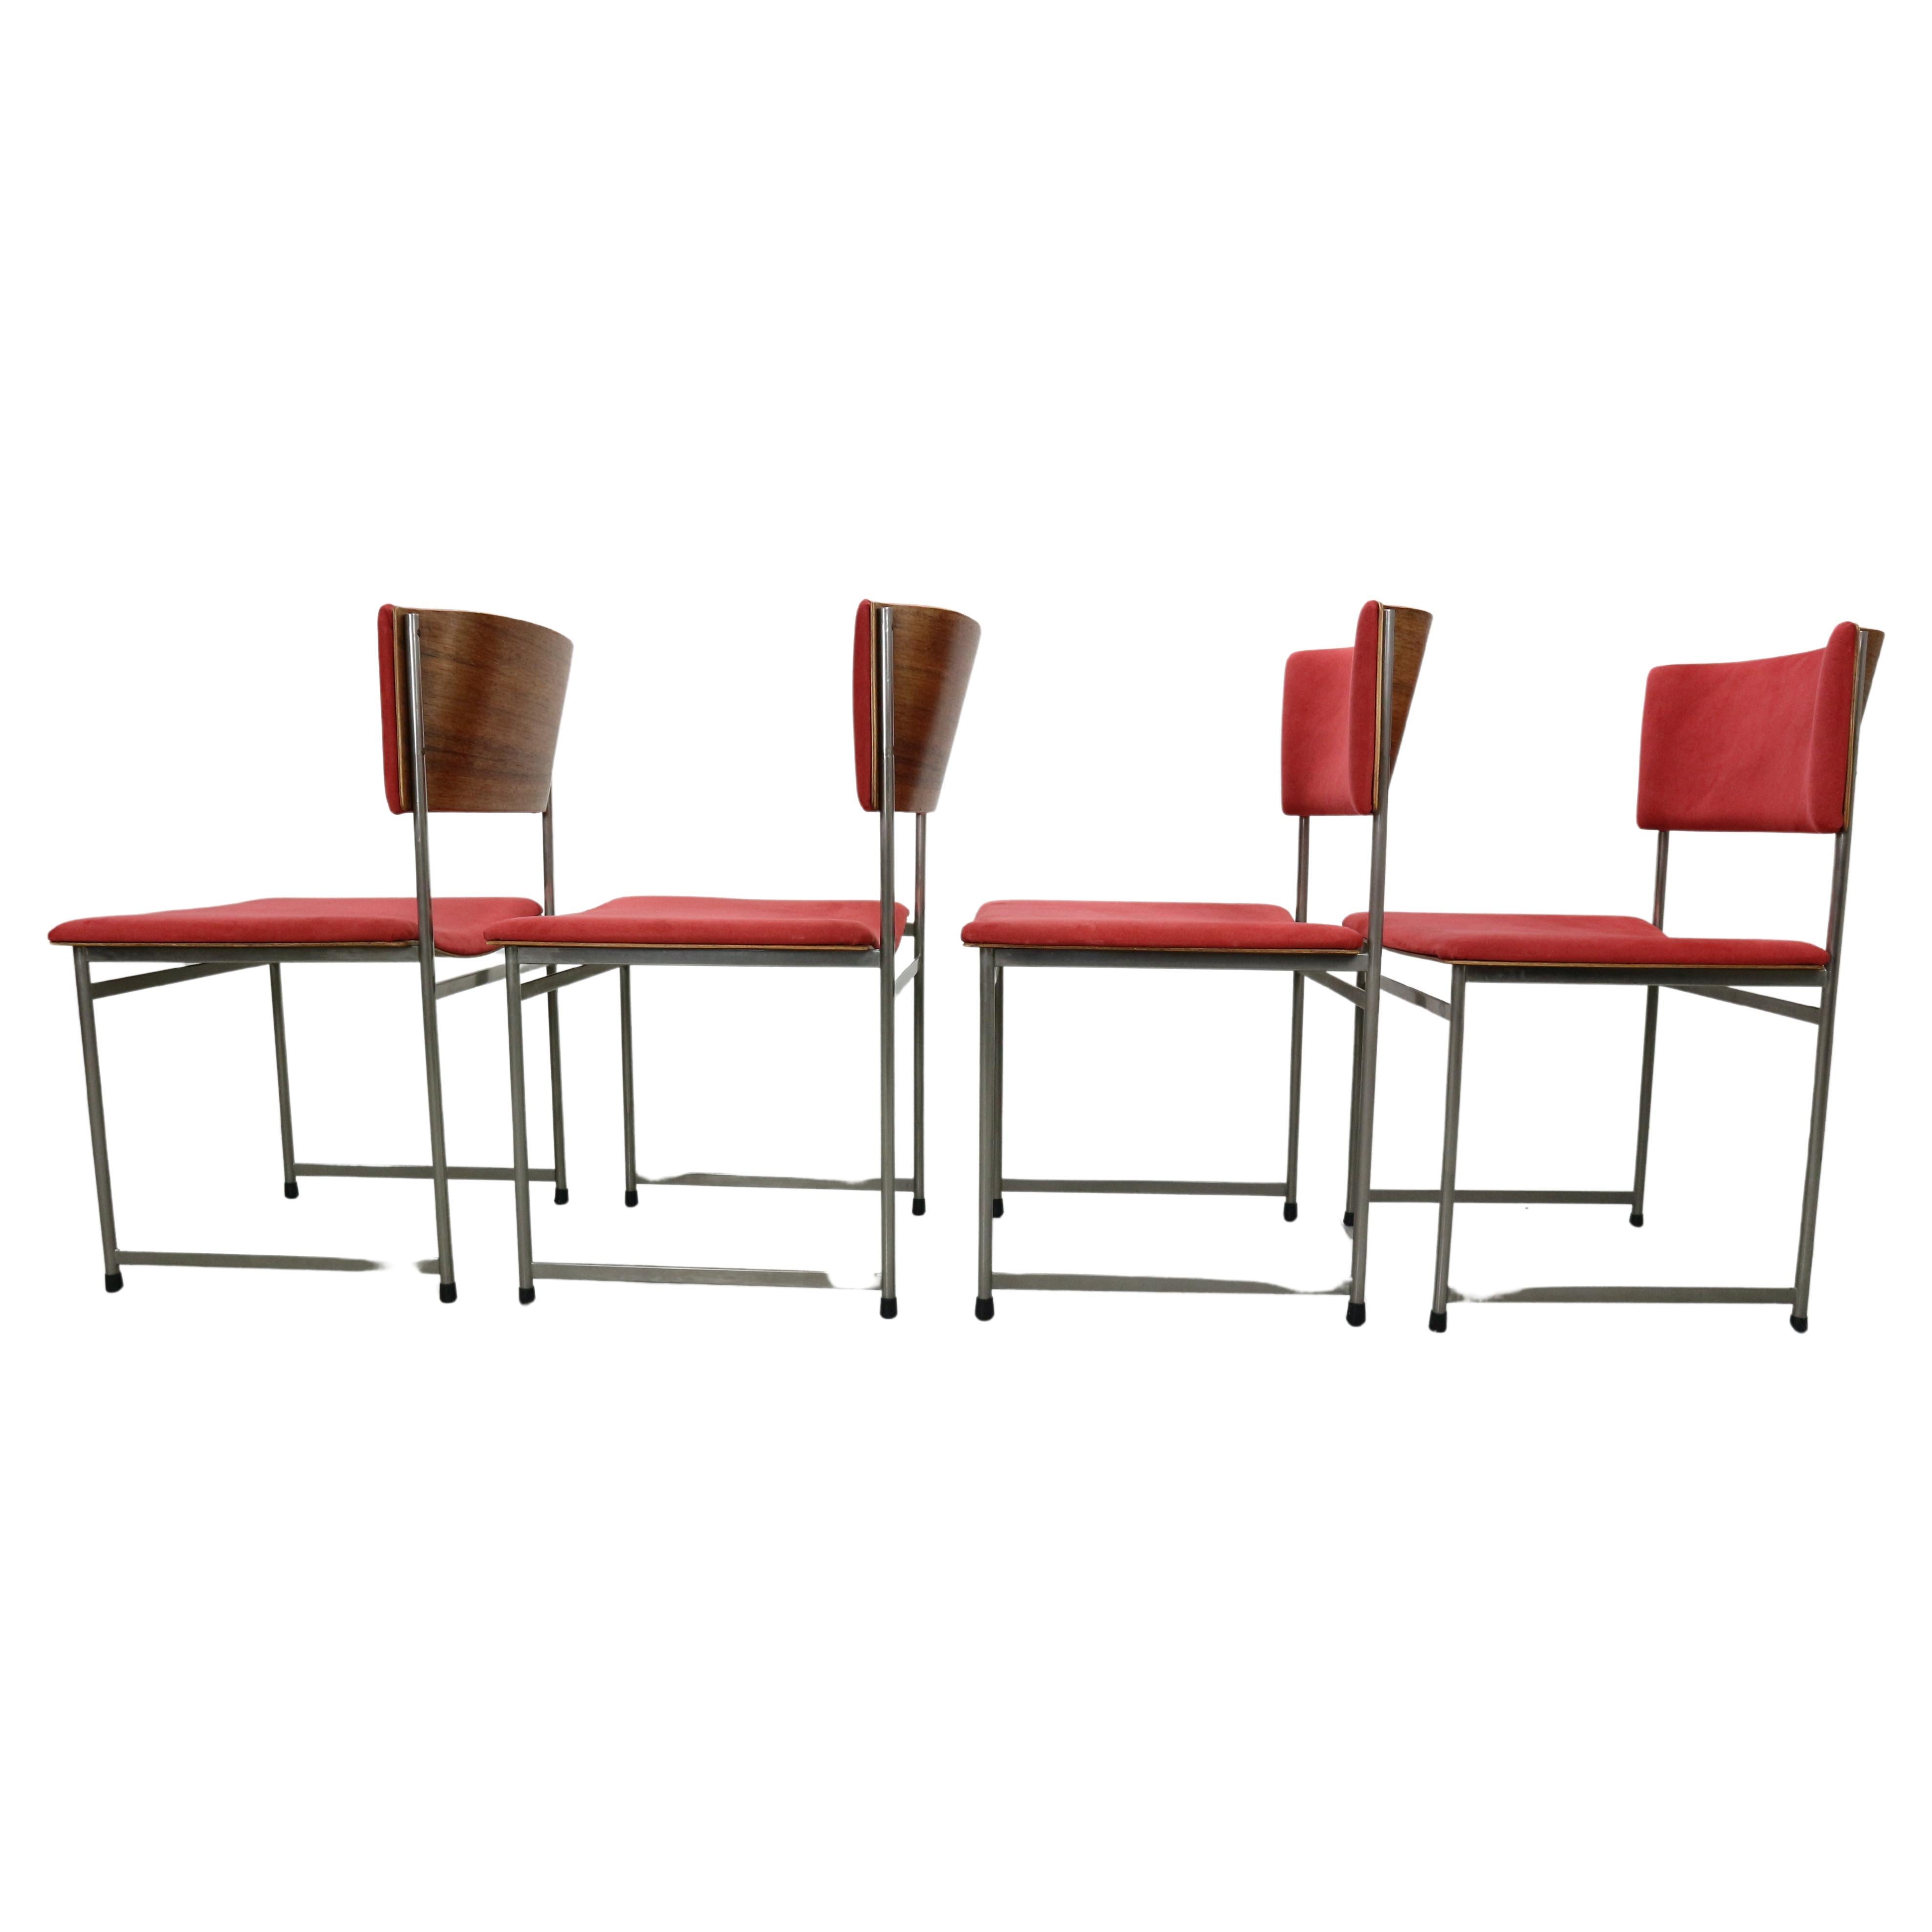 Set of 4 SM08 dining chairs by Cees Braakman for Pastoe, Netherlands 1960s In Good Condition For Sale In The Hague, NL